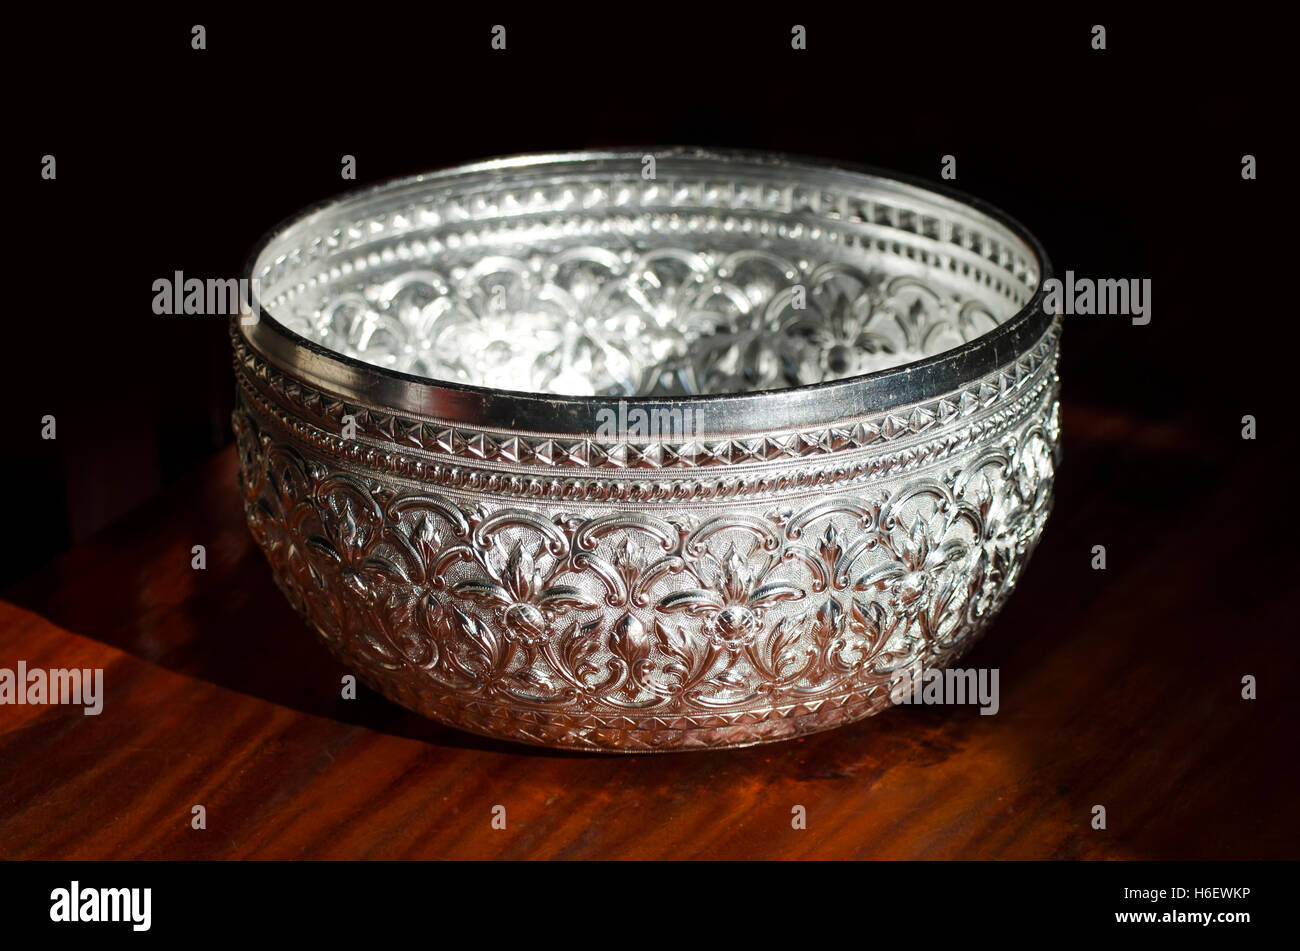 Silver bowl resting on wooden floor against a black background. Stock Photo